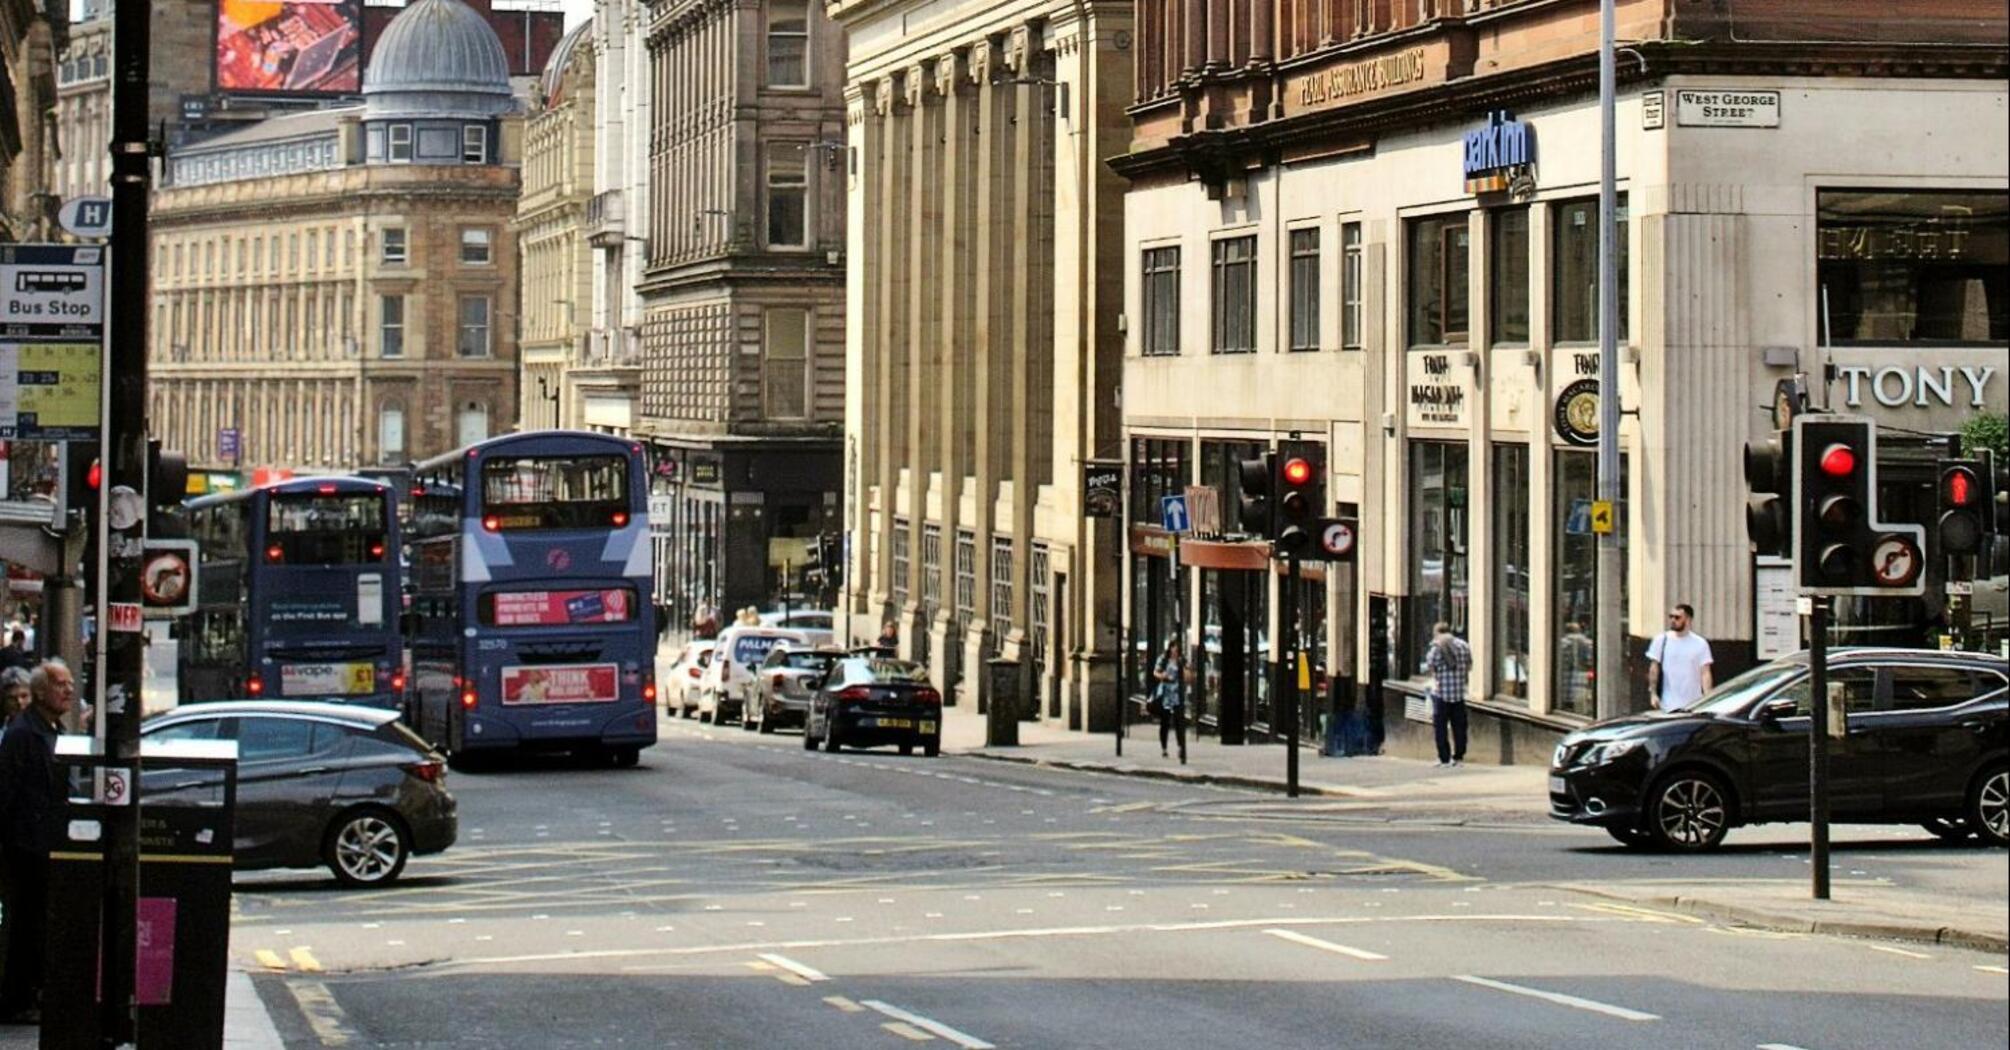 City street in Glasgow with buses and historic buildings